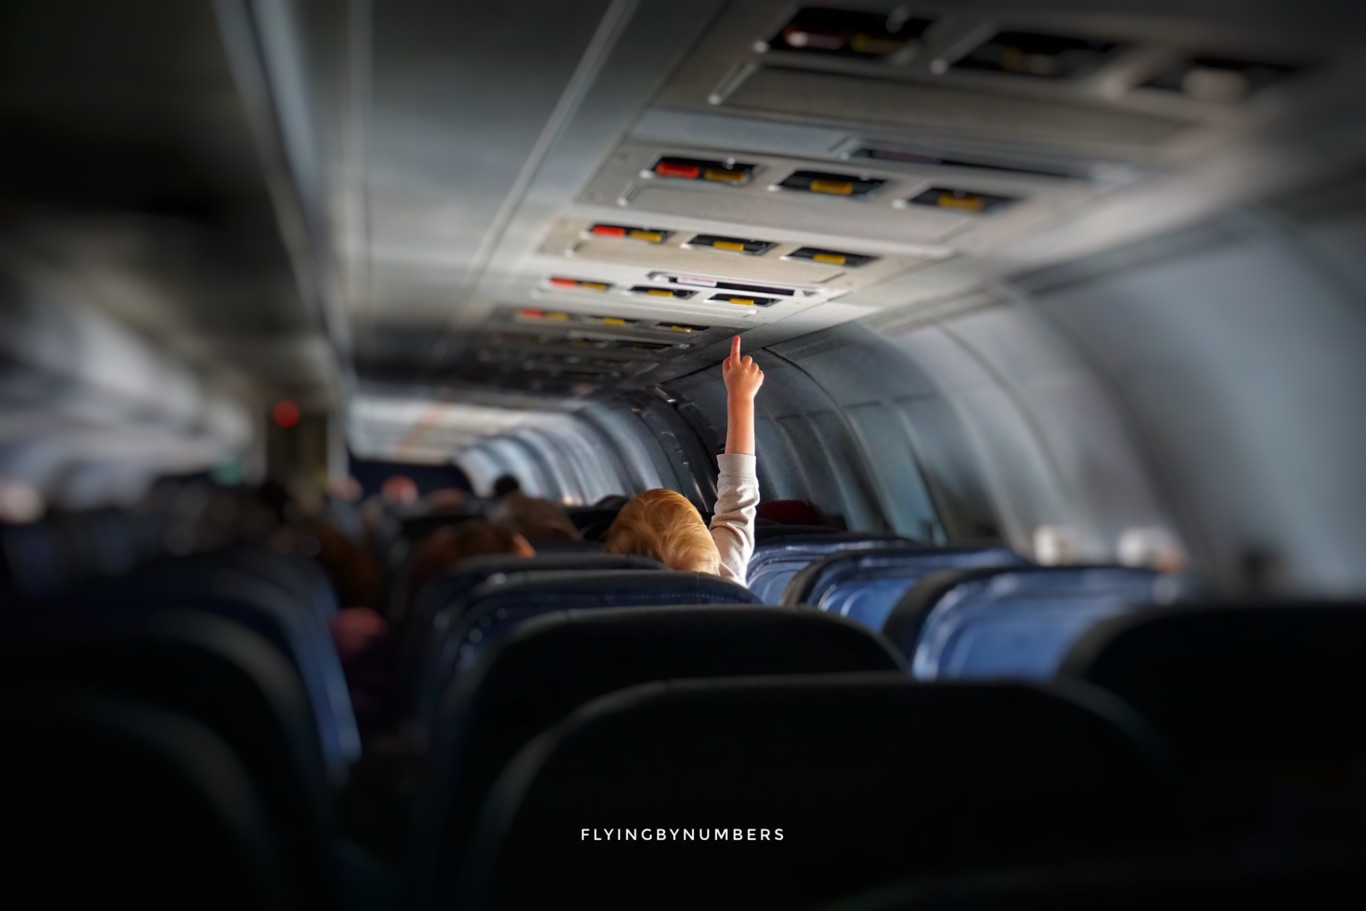 Pressing the call bell, a debate on age vs safety for flight attendant retirement